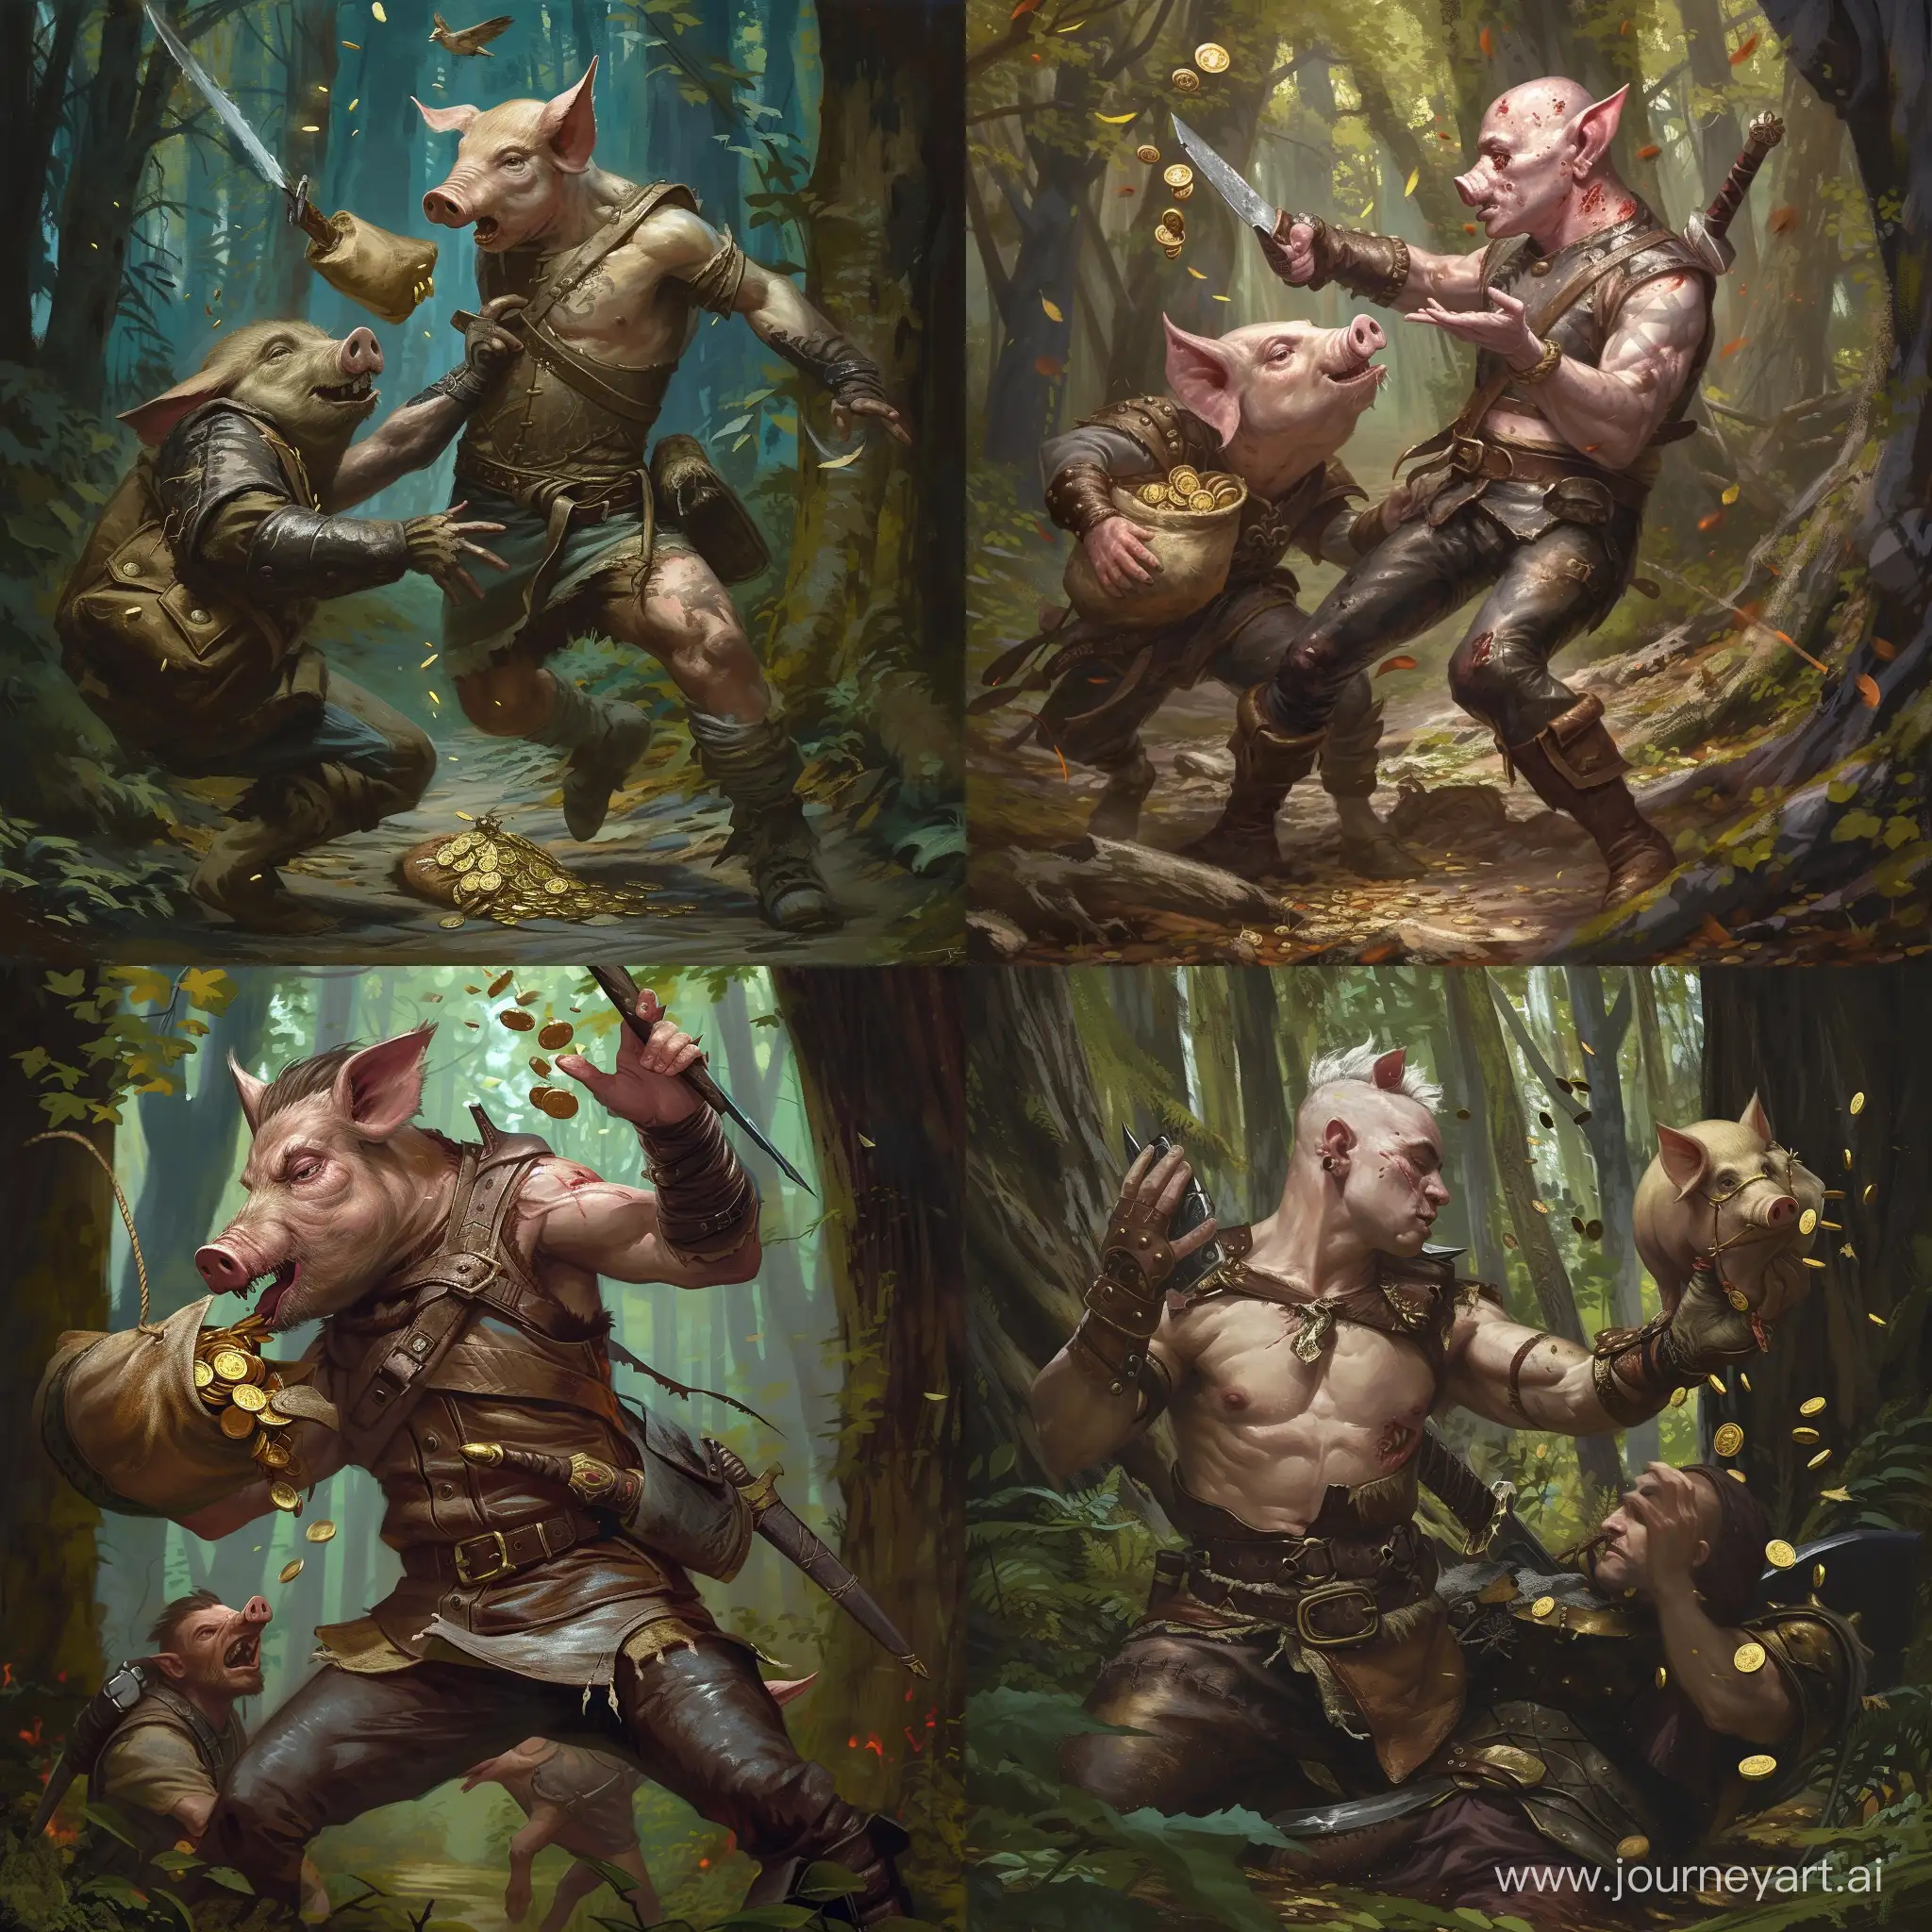 Draw a character from the Dungeons and Dragons universe according to the following description: This is a man capable of turning into a pig, fair skin, 200 centimeters tall, skinny. He is wearing leather armor and has a bag of gold coins in his bosom. He throws a knife and hits an evil bandit in the forest